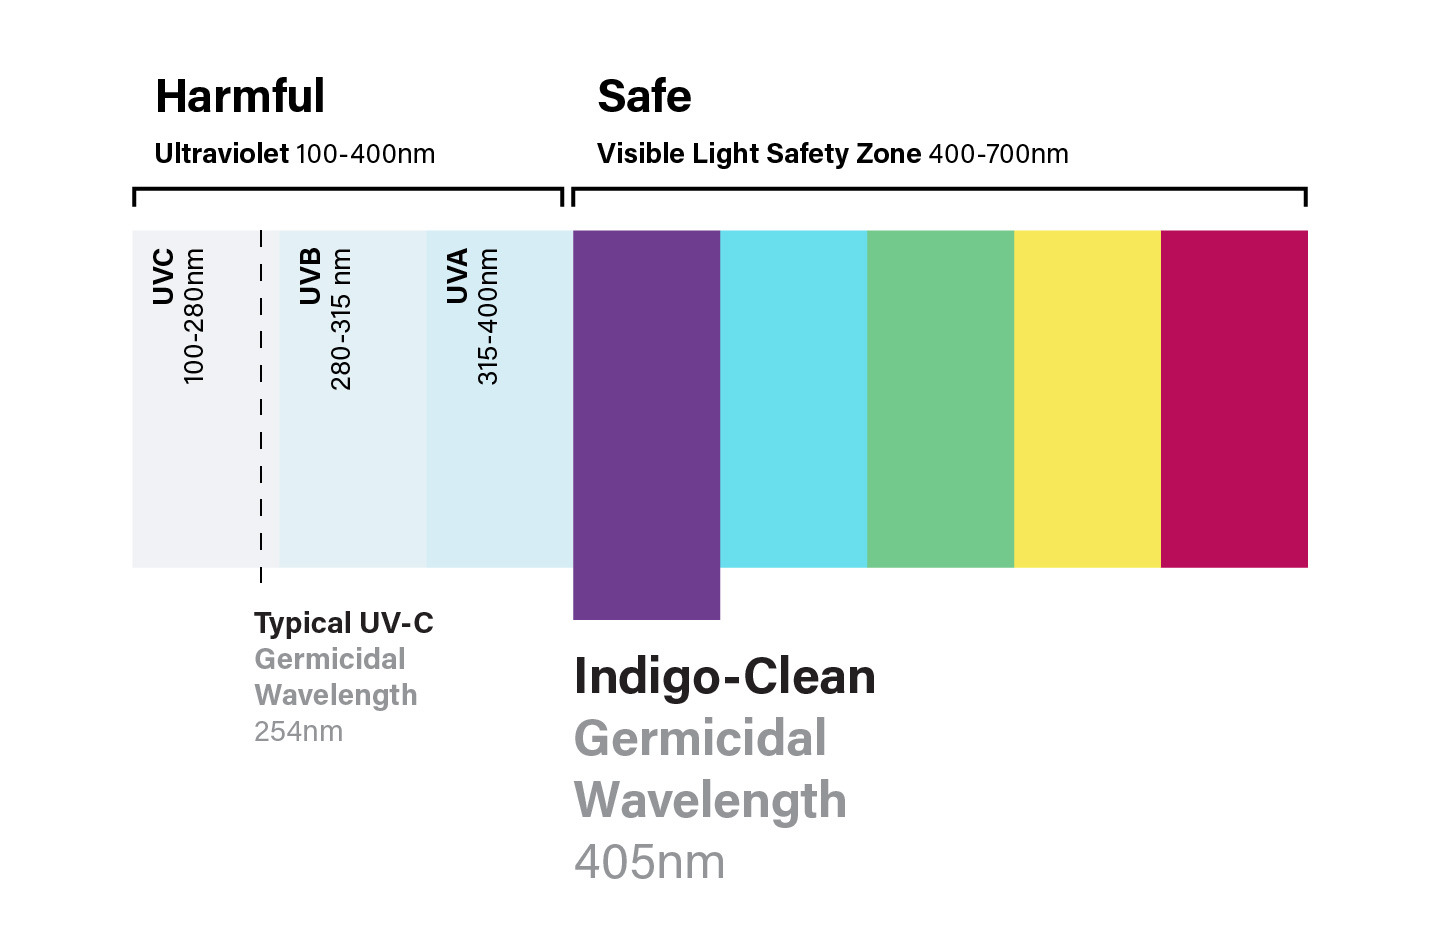 Light Wavelength Chart showing the difference between harmful UV wavelength and the safe visible wavelength of Indigo-Clean at 405 nanometers